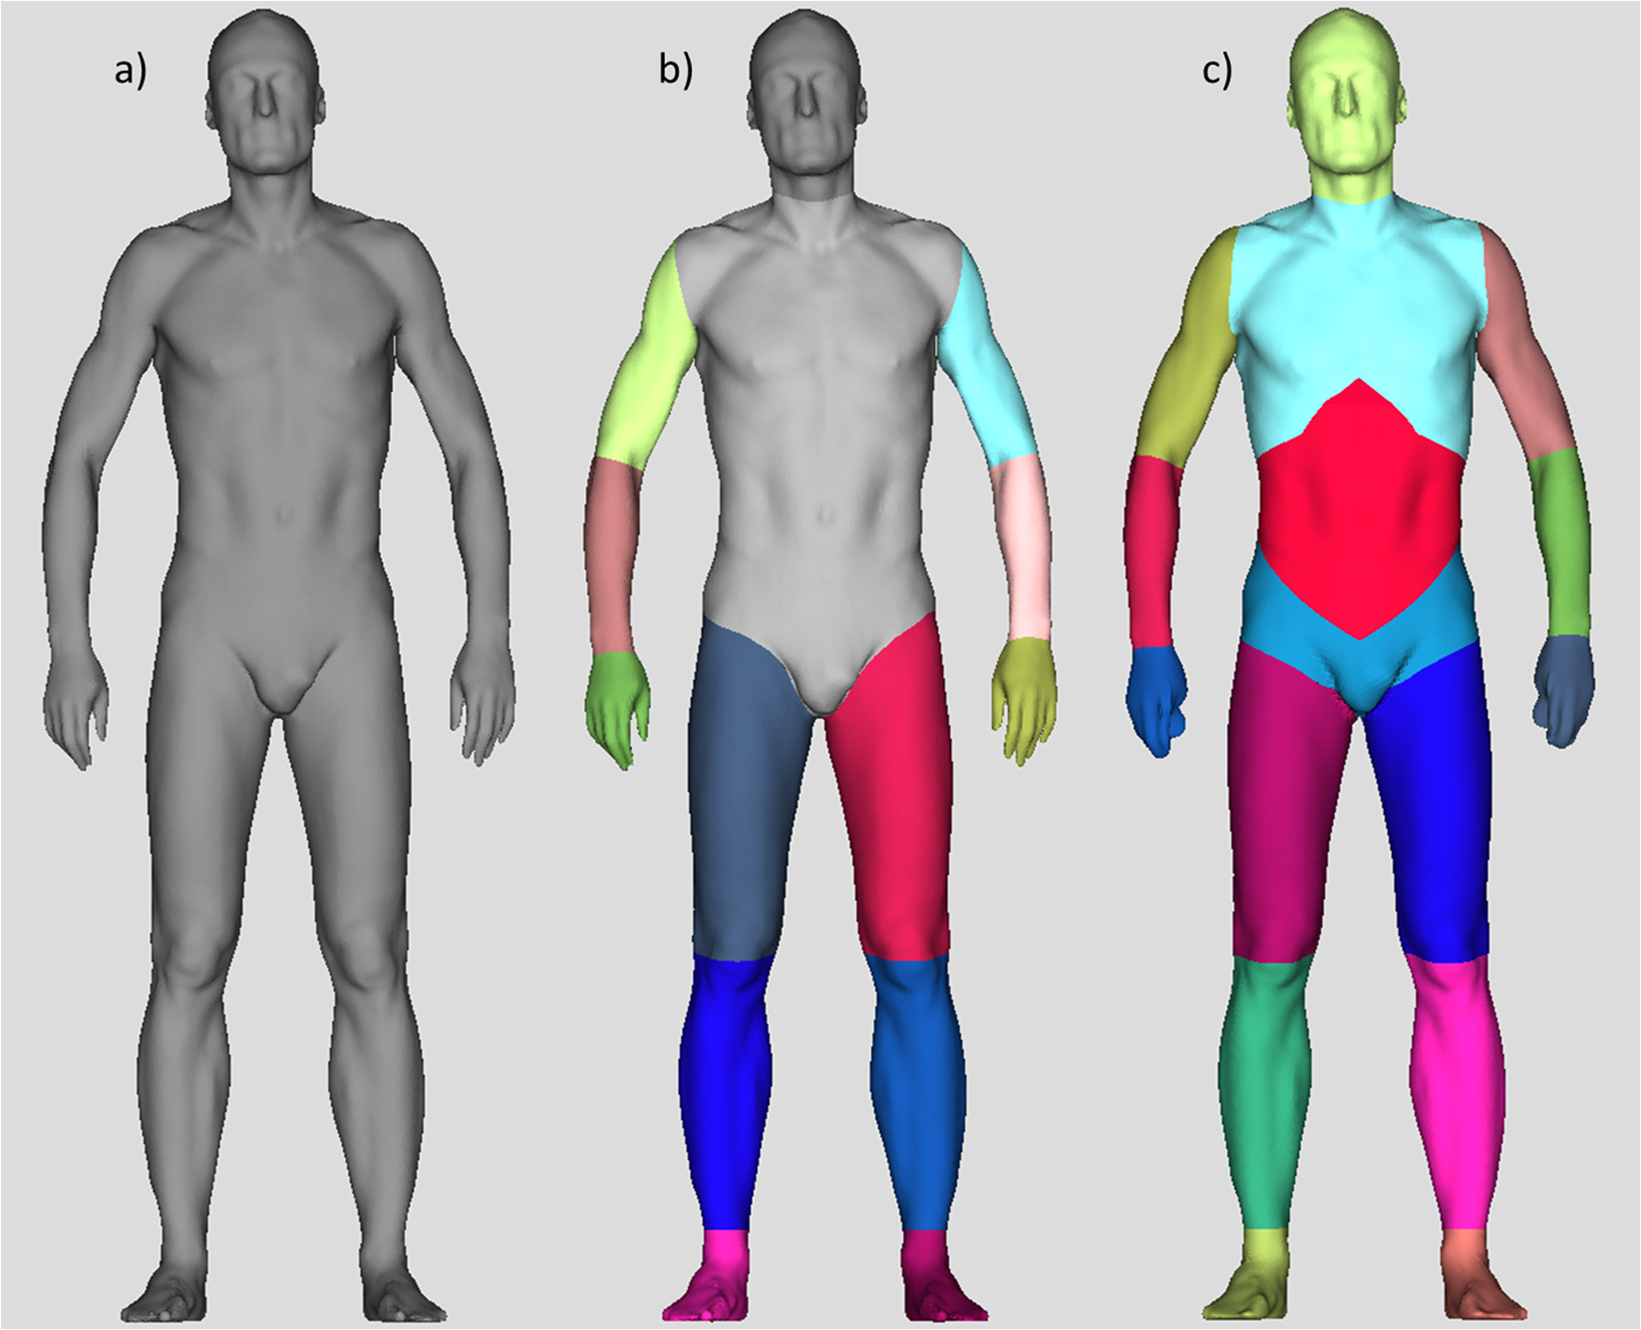 Association of body surface scanner-based abdominal volume with parameters  of the Metabolic Syndrome and comparison with manually measured waist  circumference | Scientific Reports